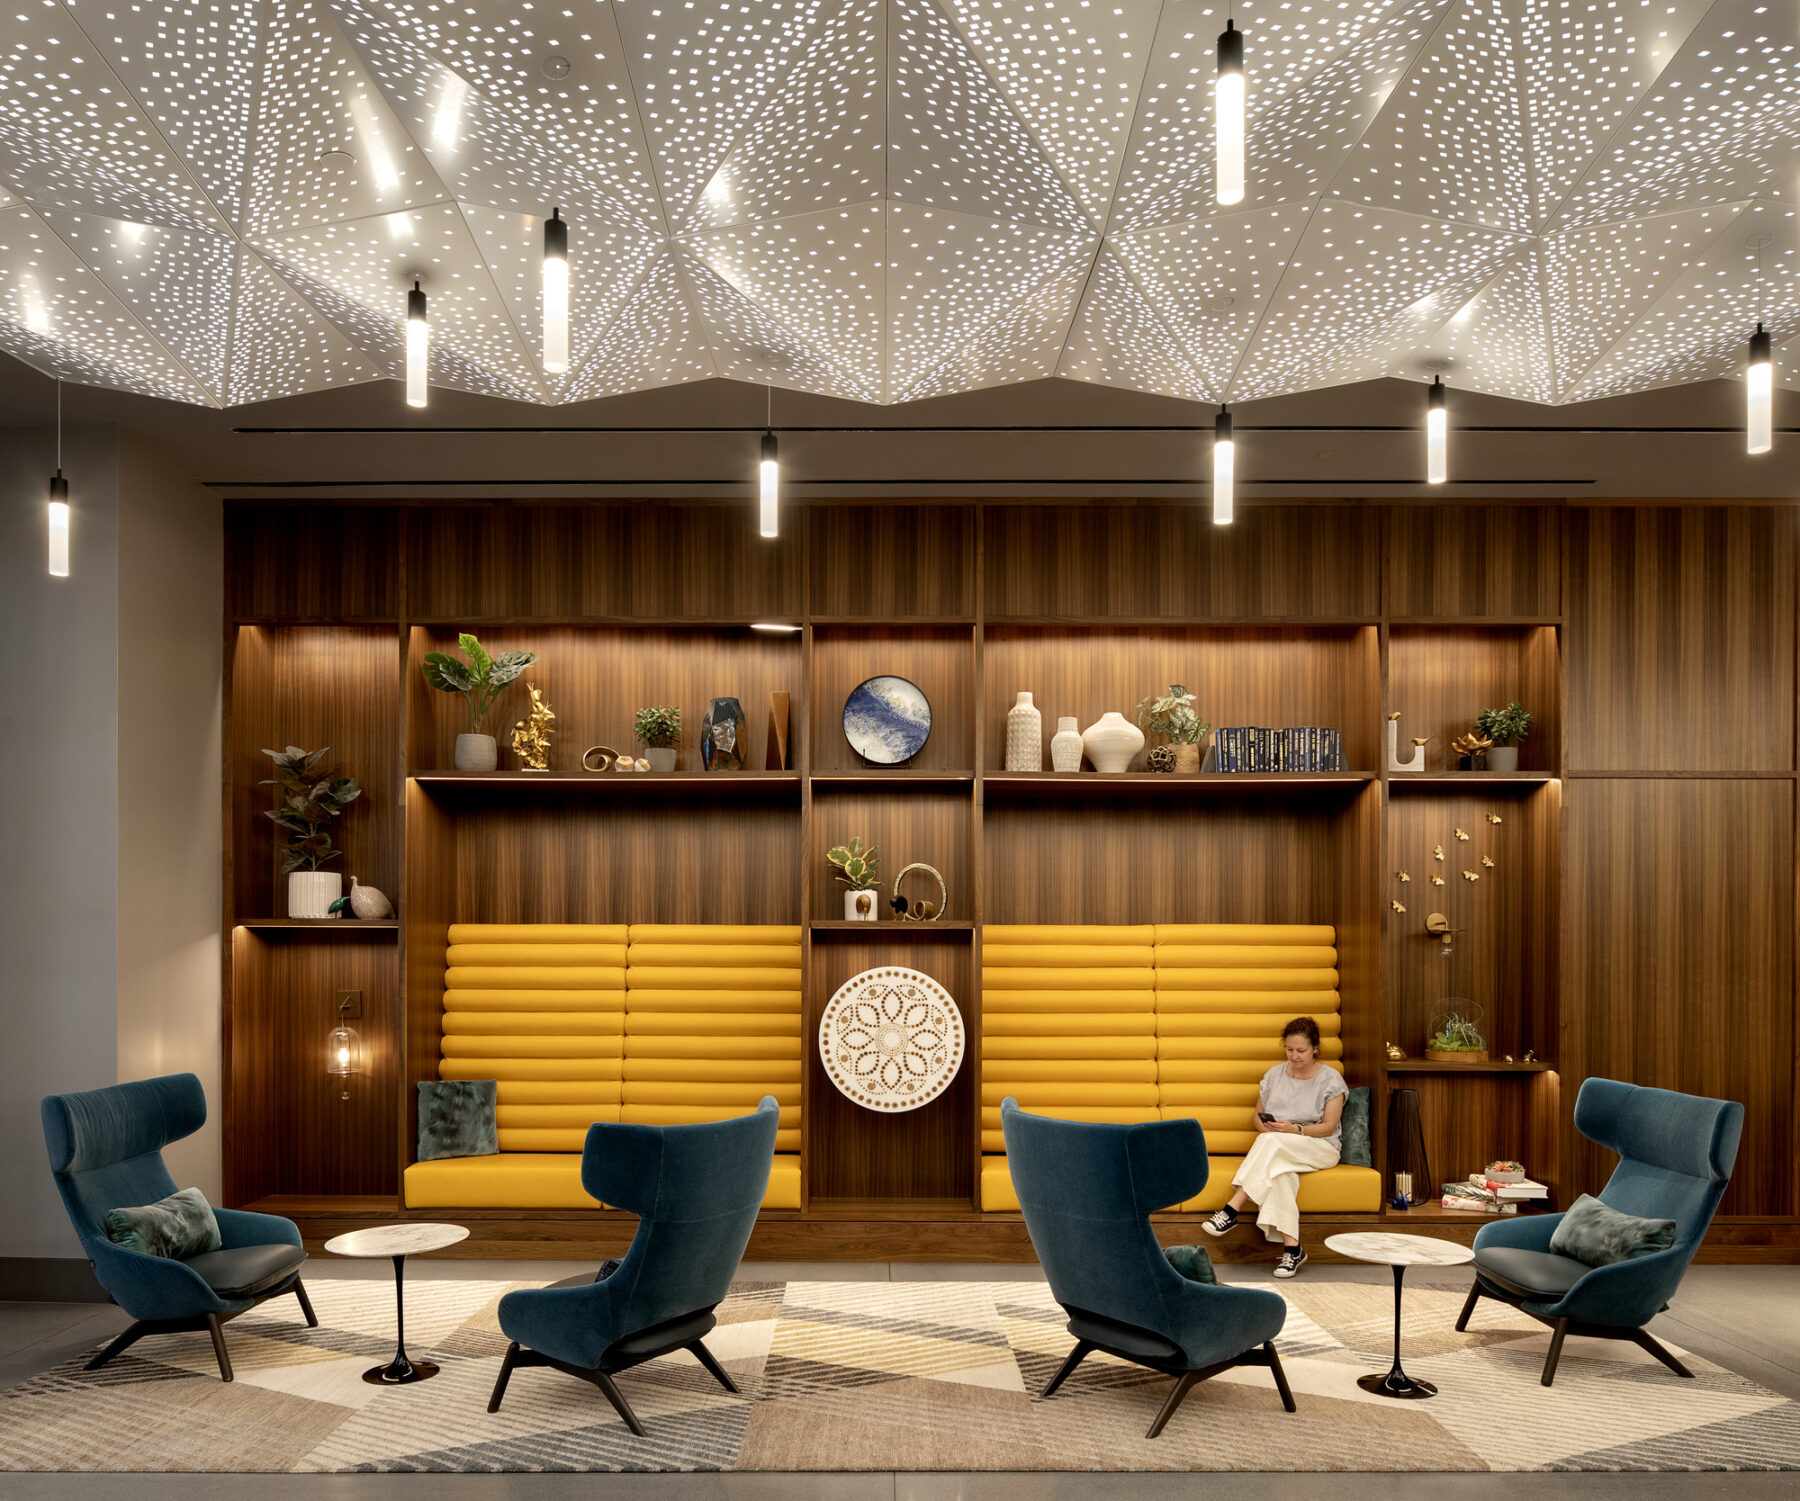 photograph of interior lobby space with backlit perforated ceilings, a millwork with curated decorations, and custom furniture